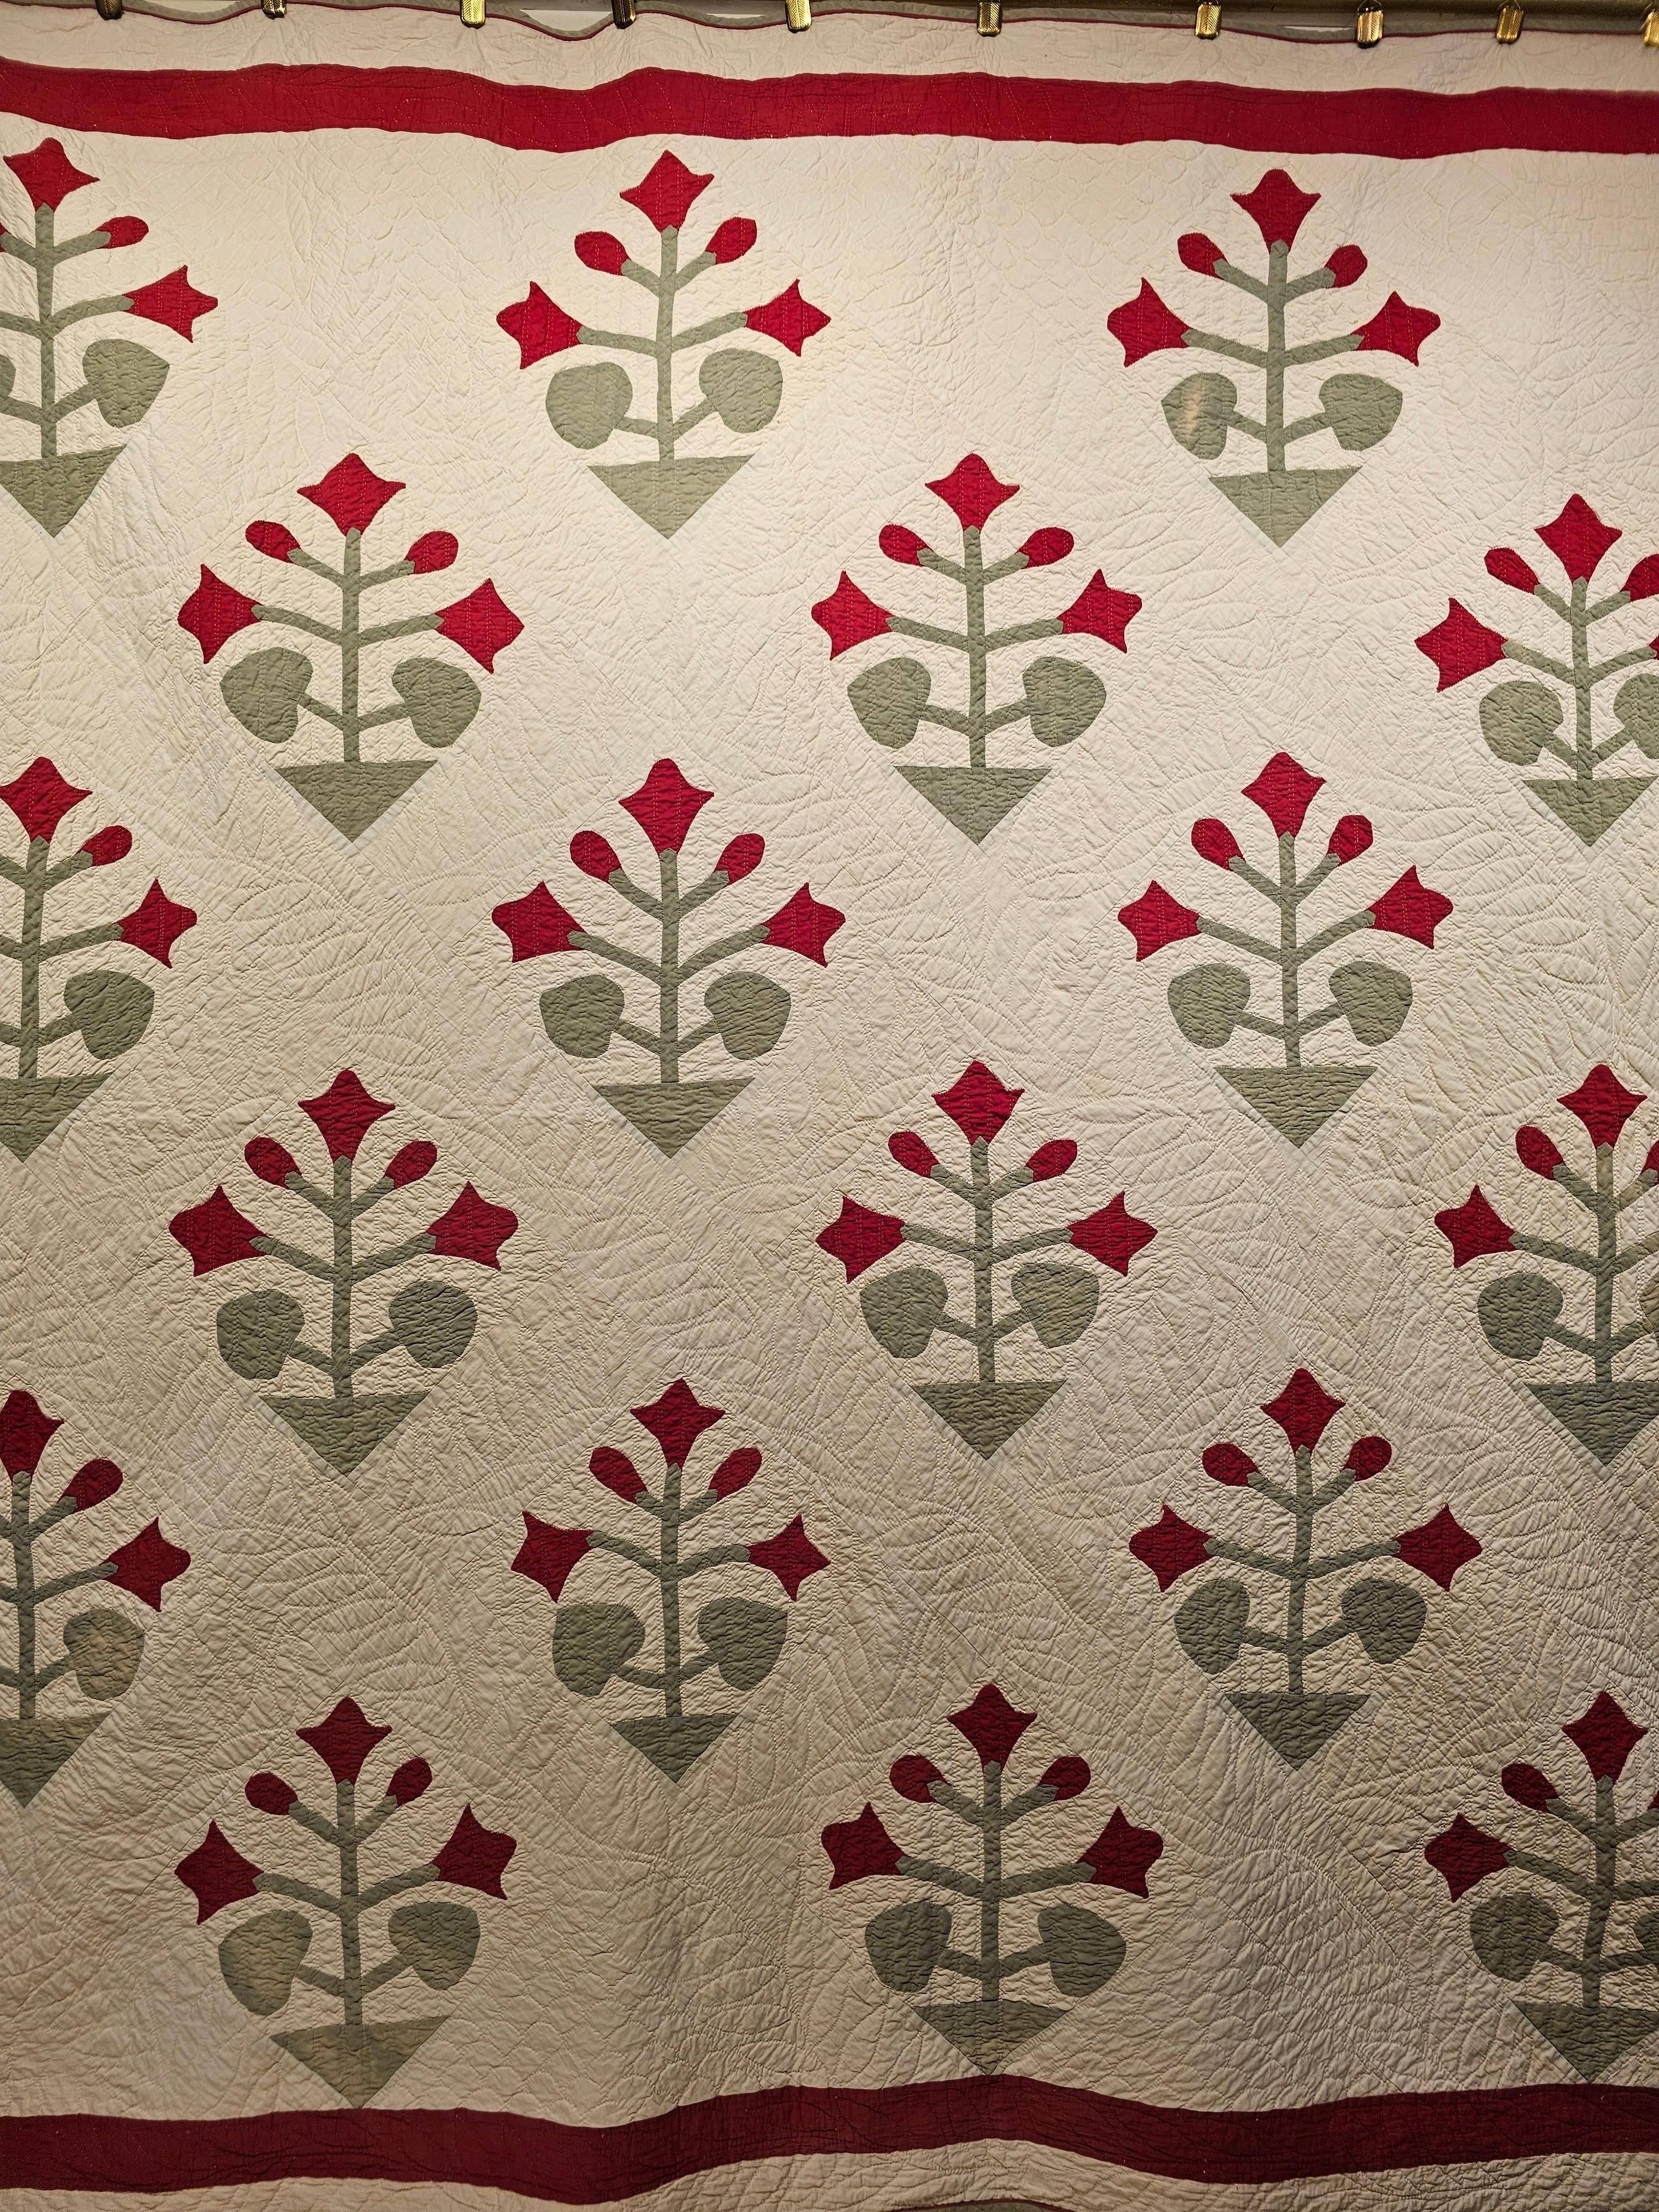 Appliqué 19th Century American Applique Quilt in Floral Pattern in Ivory, Red, and Green